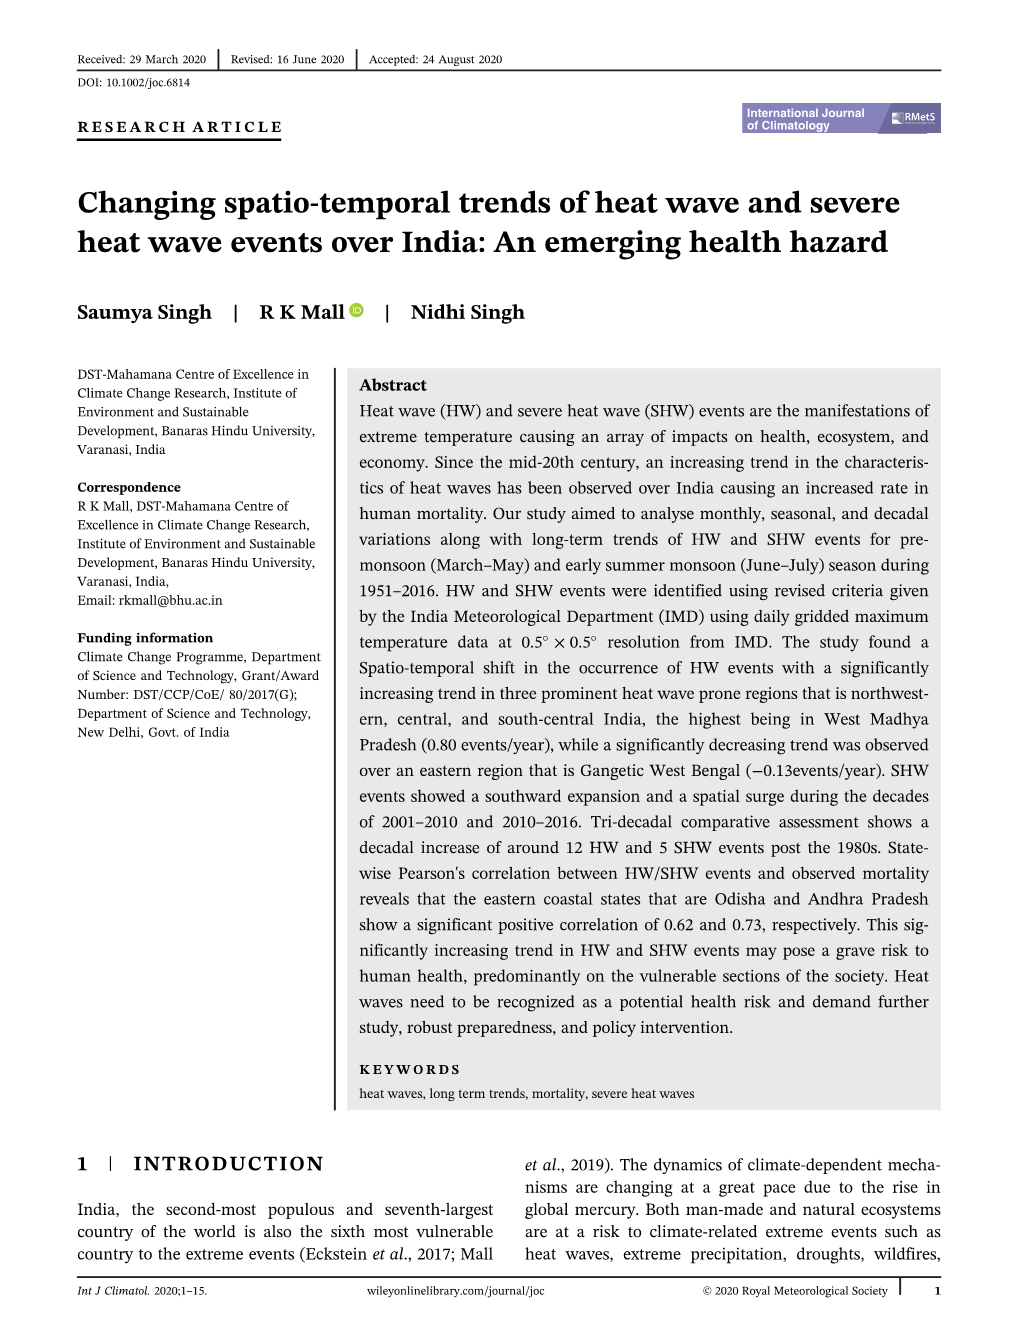 Changing Spatio‐Temporal Trends of Heat Wave and Severe